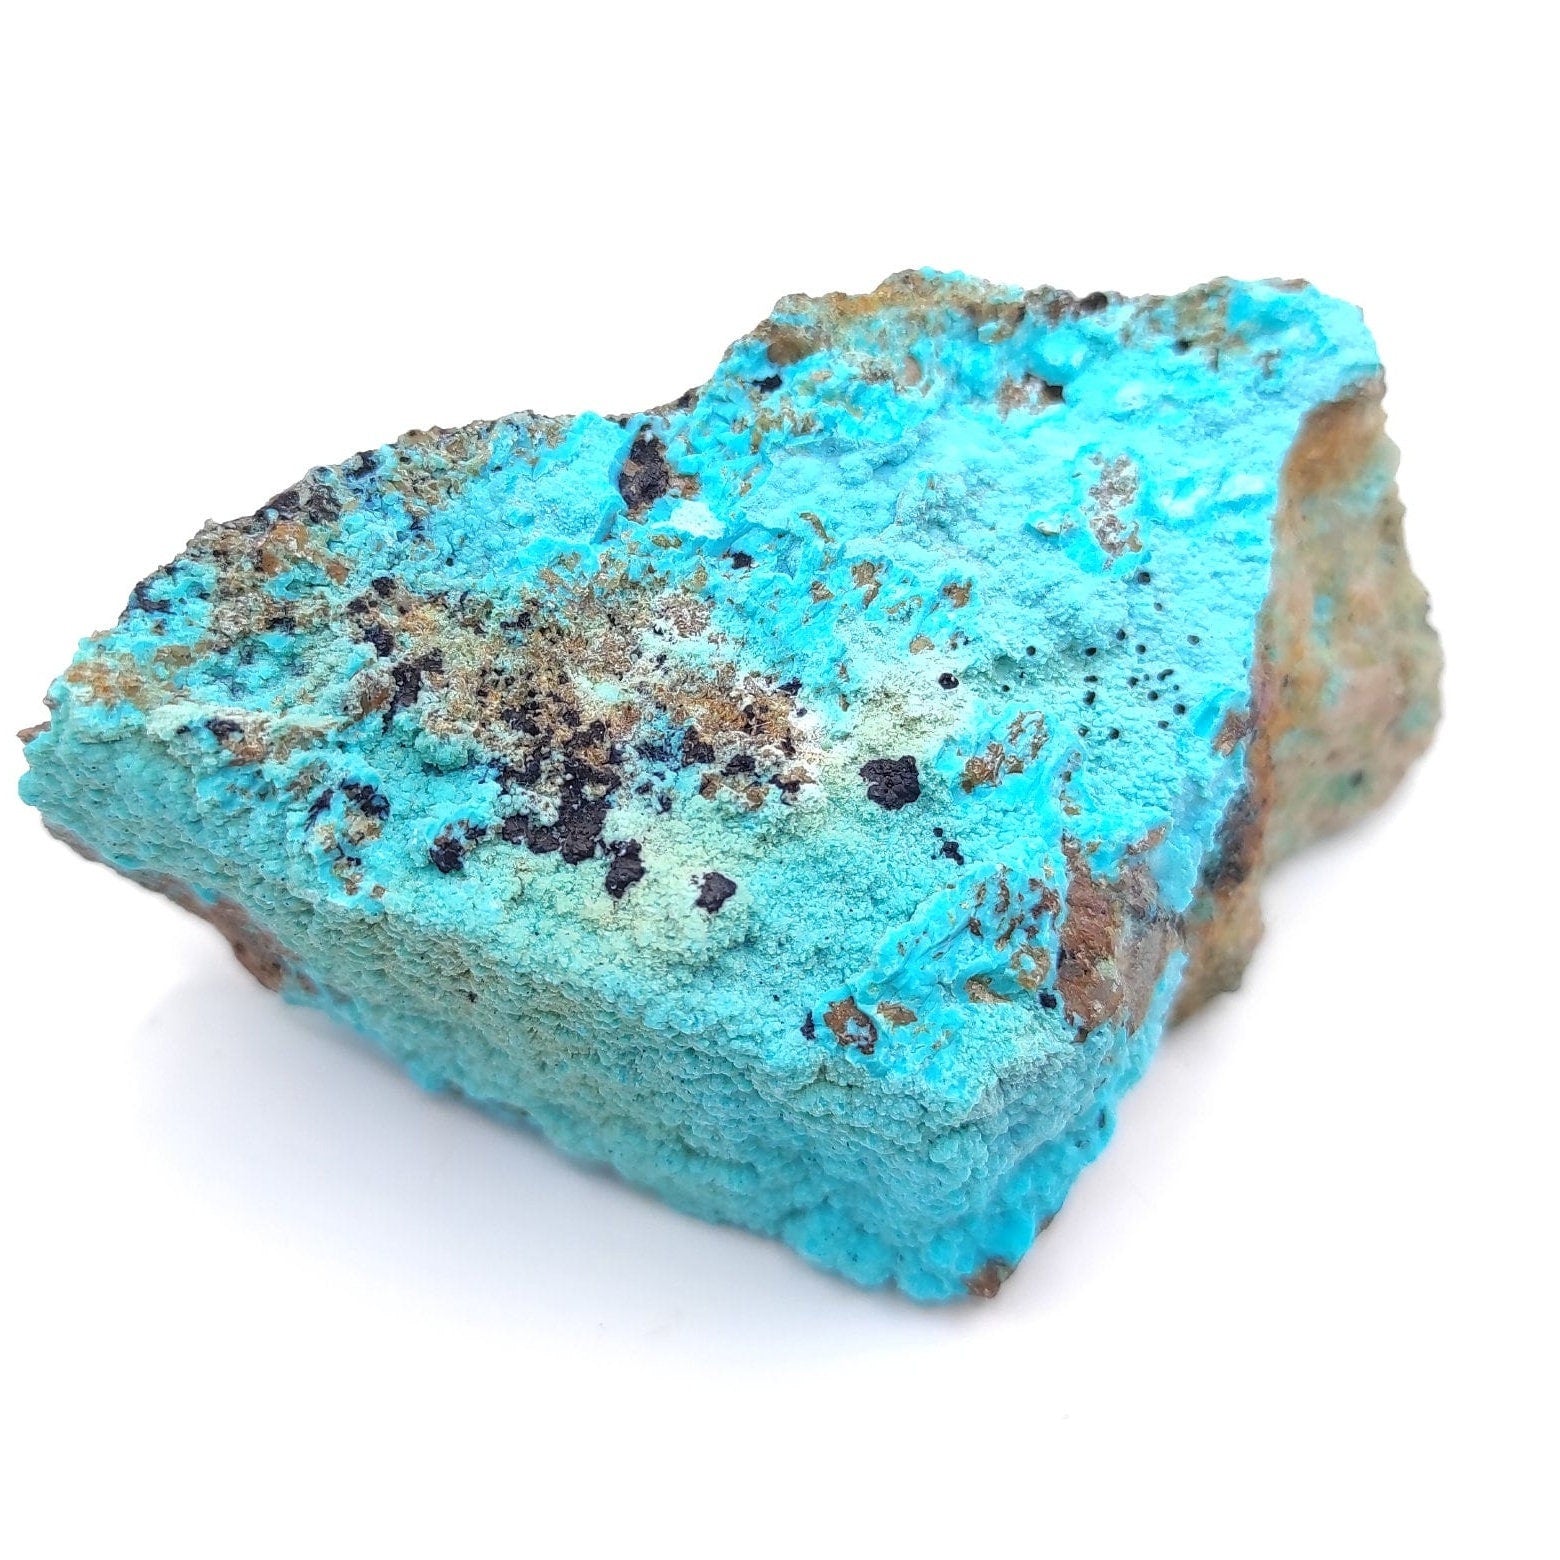 96g Chrysocolla on Matrix - Tyrone, New Mexico - Rough Chrysocolla from United States - Natural Chrysocolla Mineral Specimen - Raw Crystals